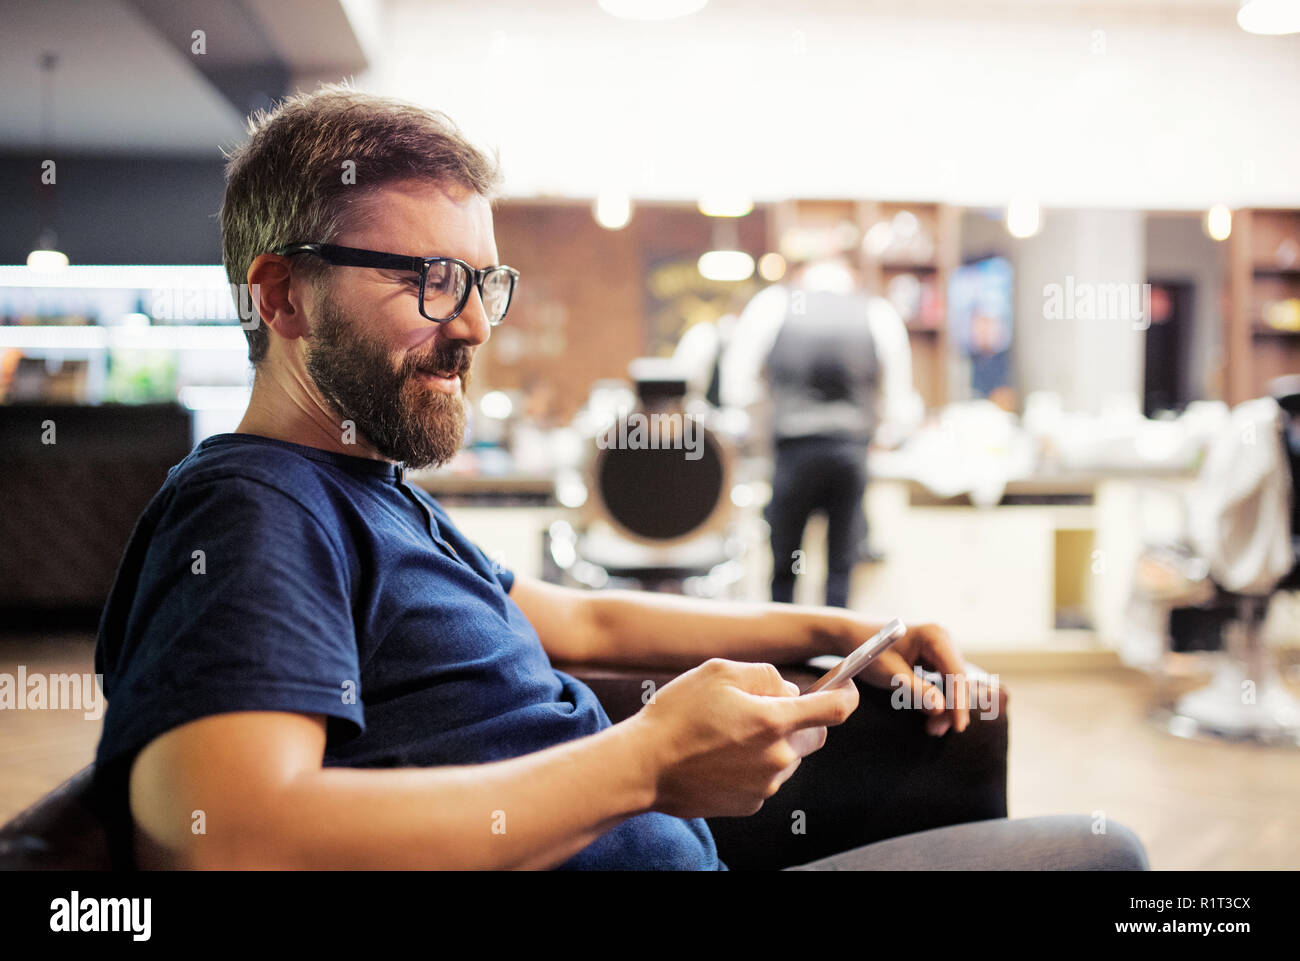 Hipster man client visiting haidresser and hairstylist in barber shop, waiting. Stock Photo